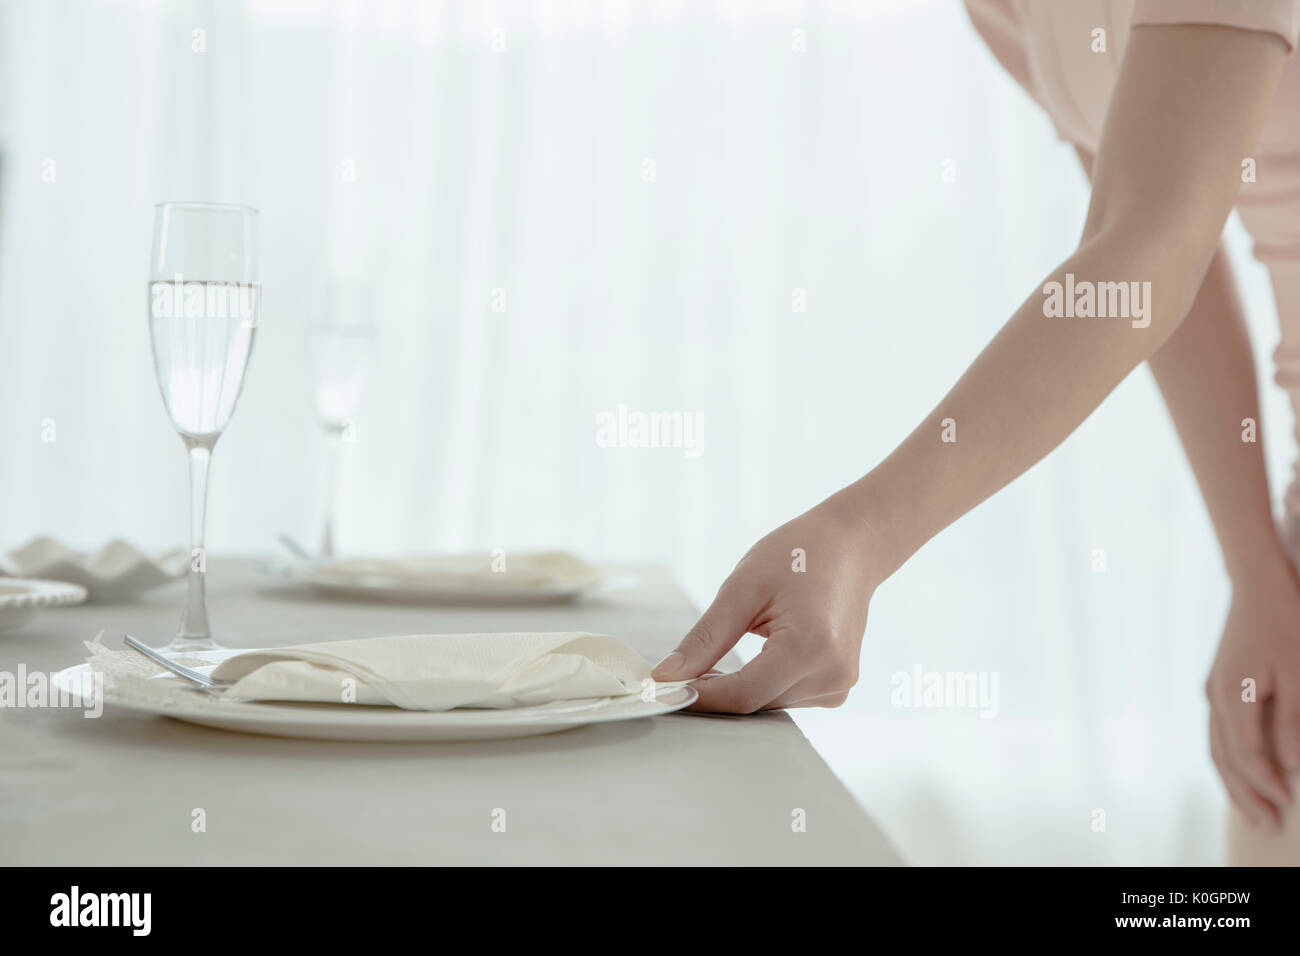 Woman holding a dish at party Stock Photo